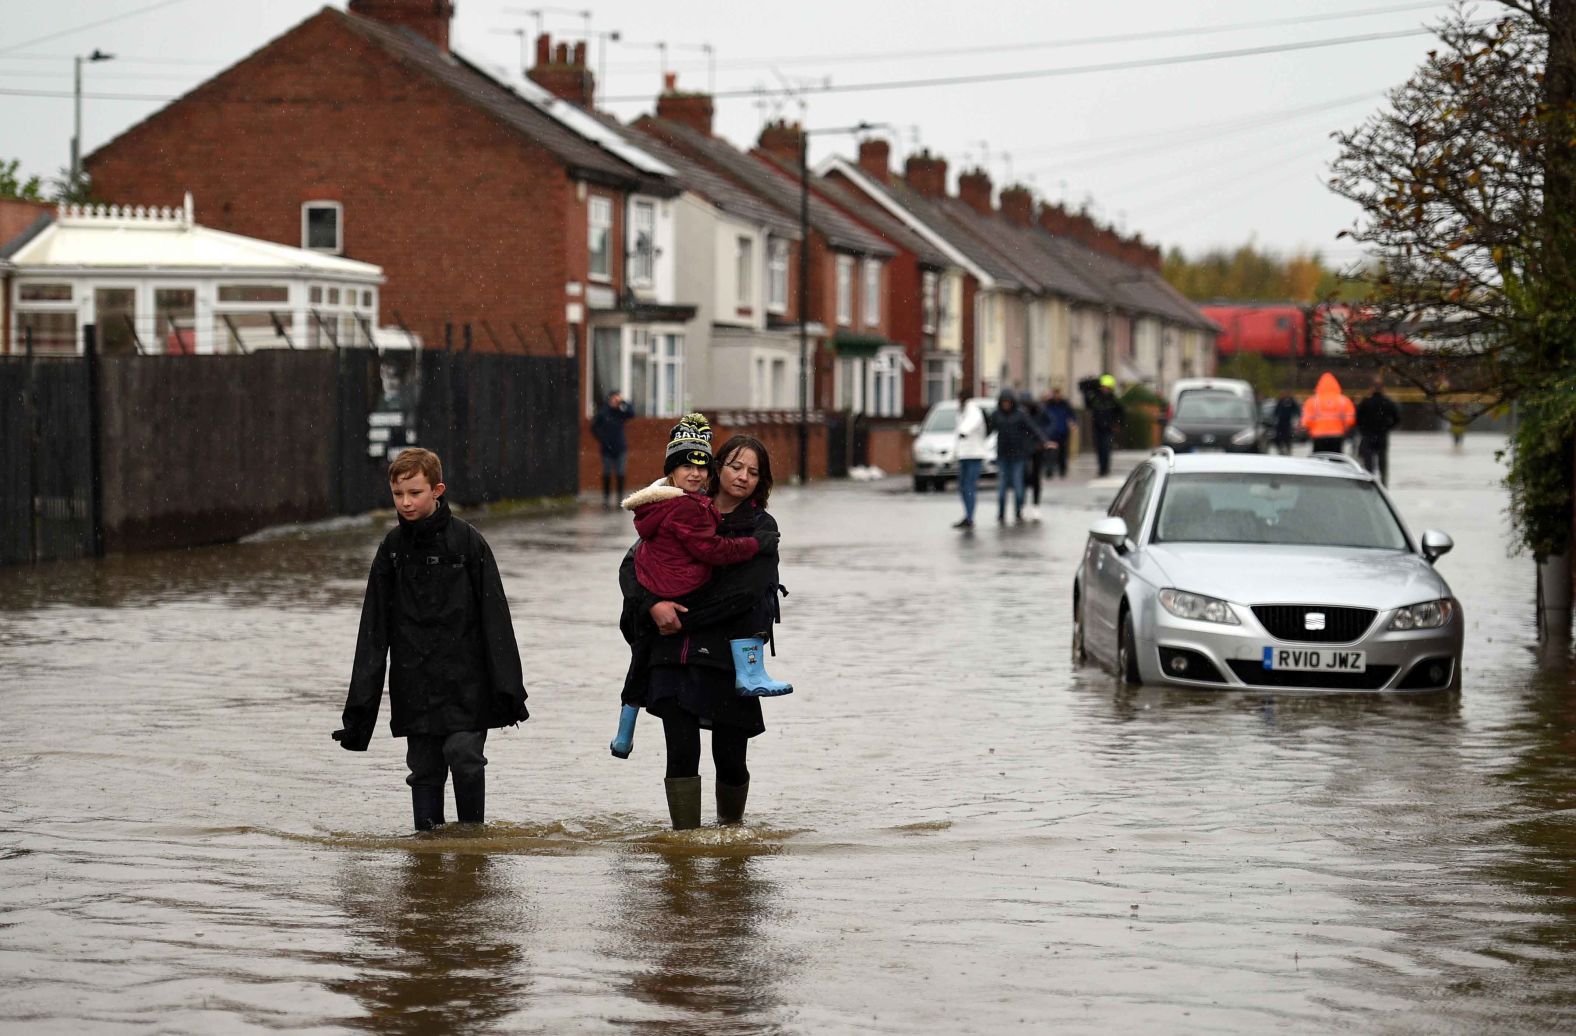 Residents walk through floodwaters in Doncaster, England, on November 8.